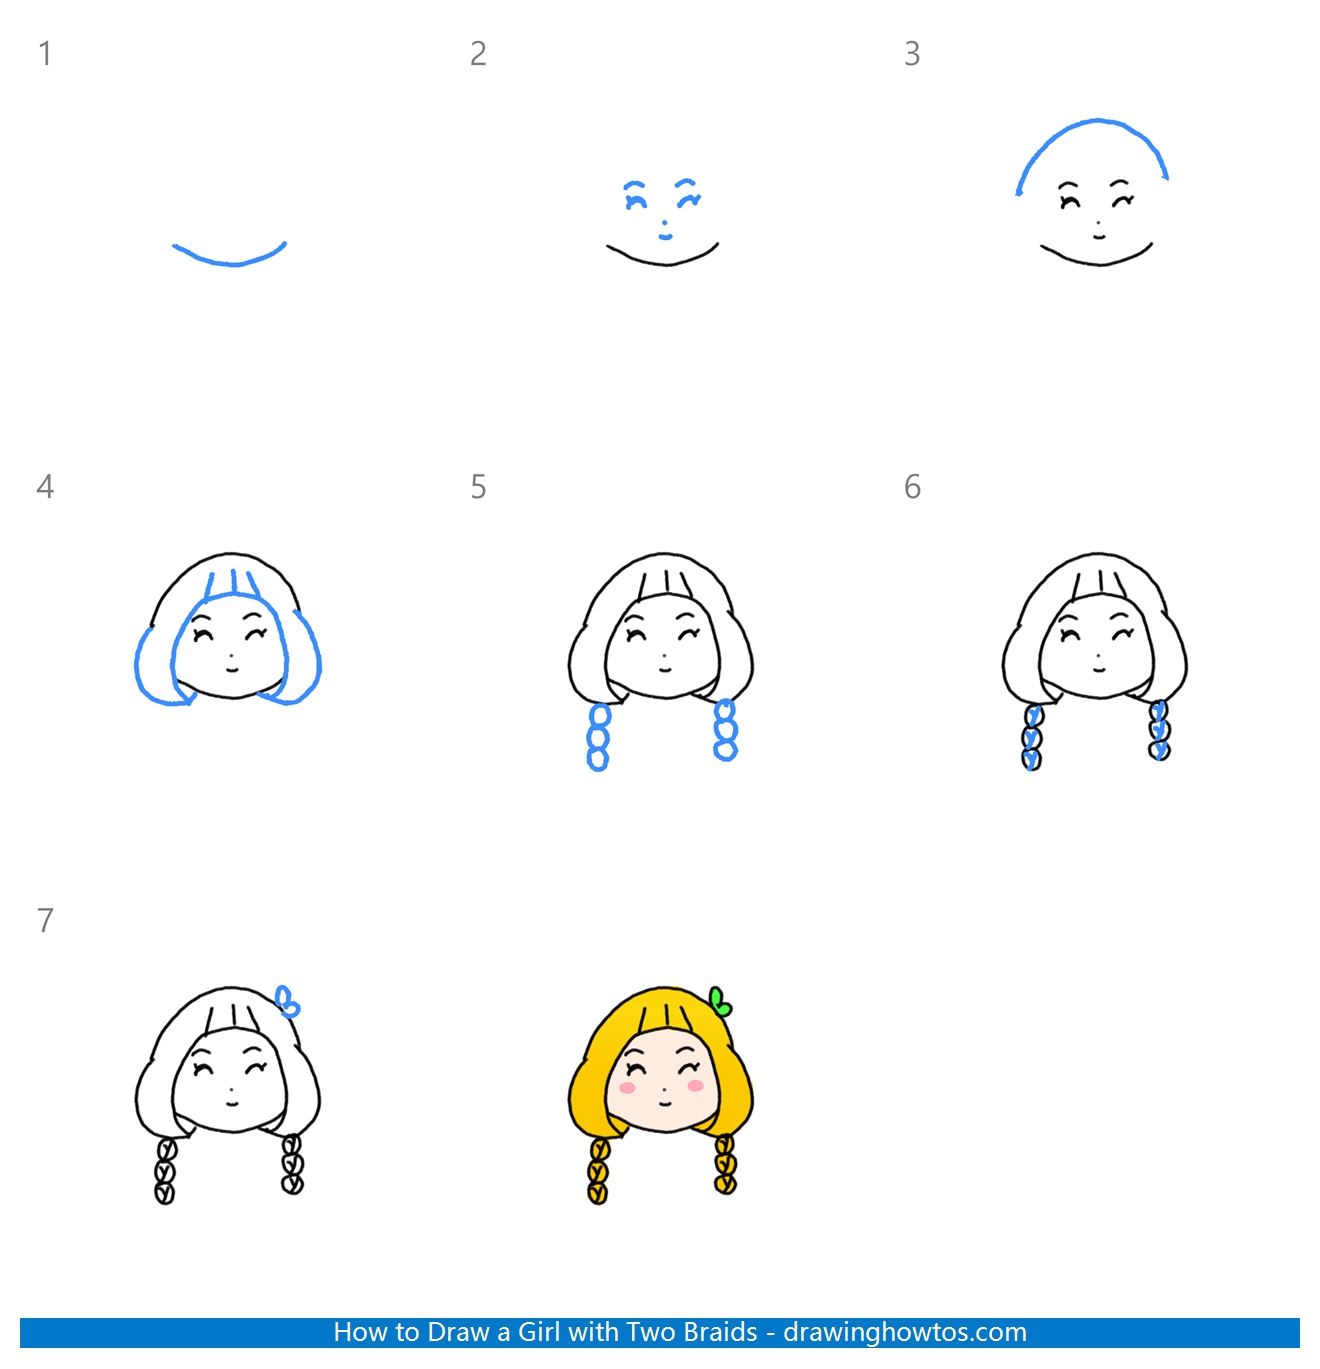 How to Draw a Girl with Two Braids Step by Step